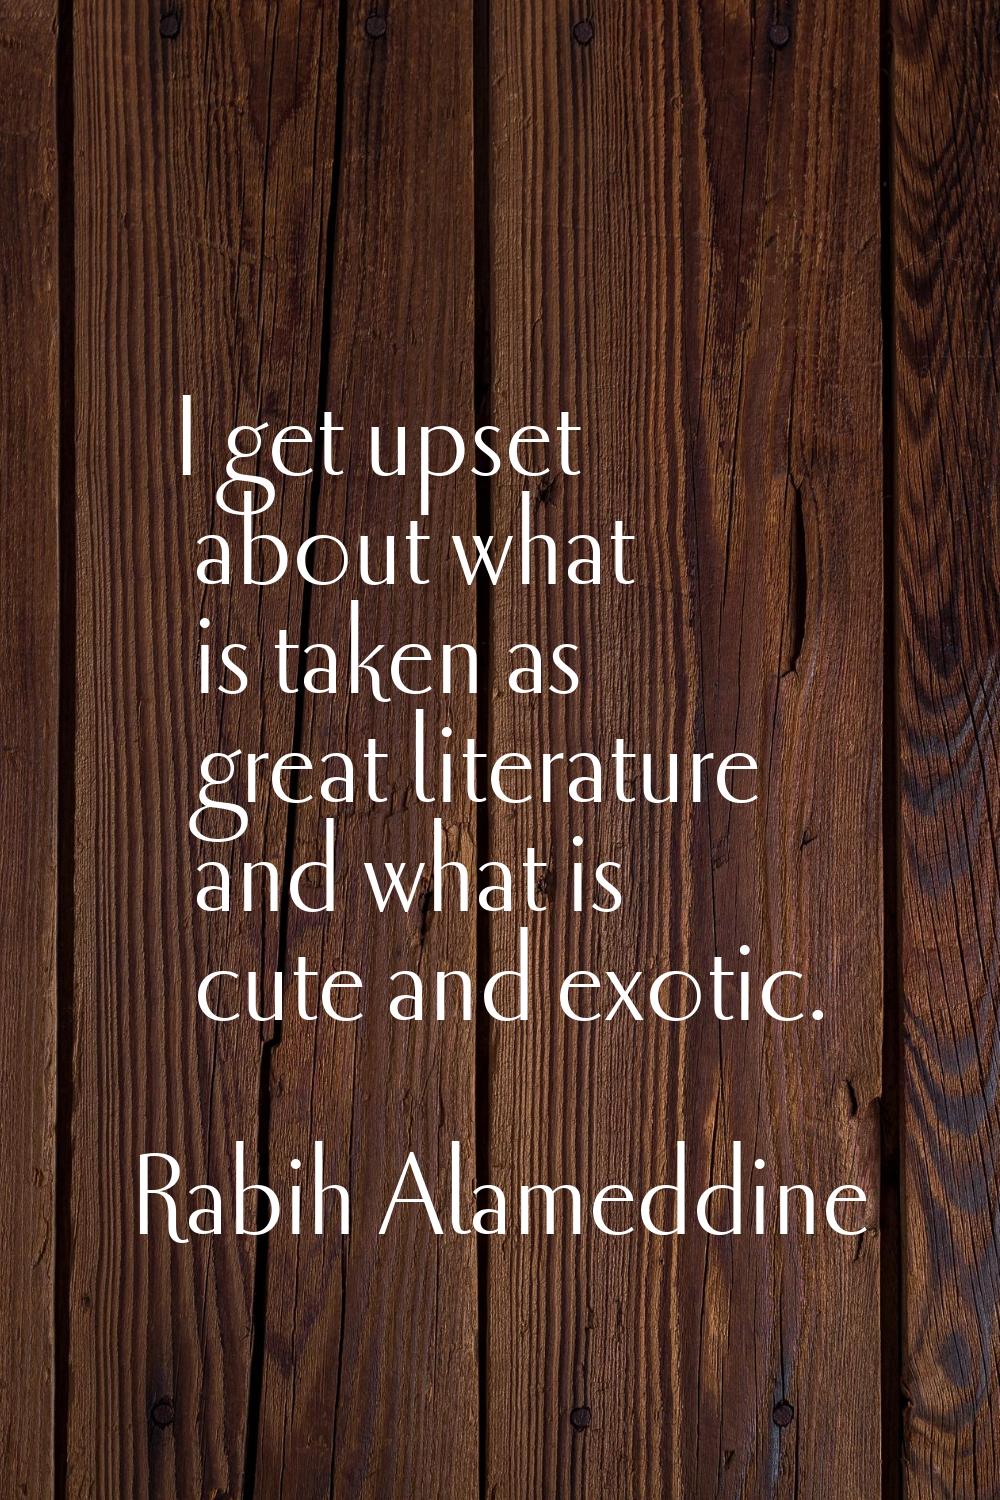 I get upset about what is taken as great literature and what is cute and exotic.